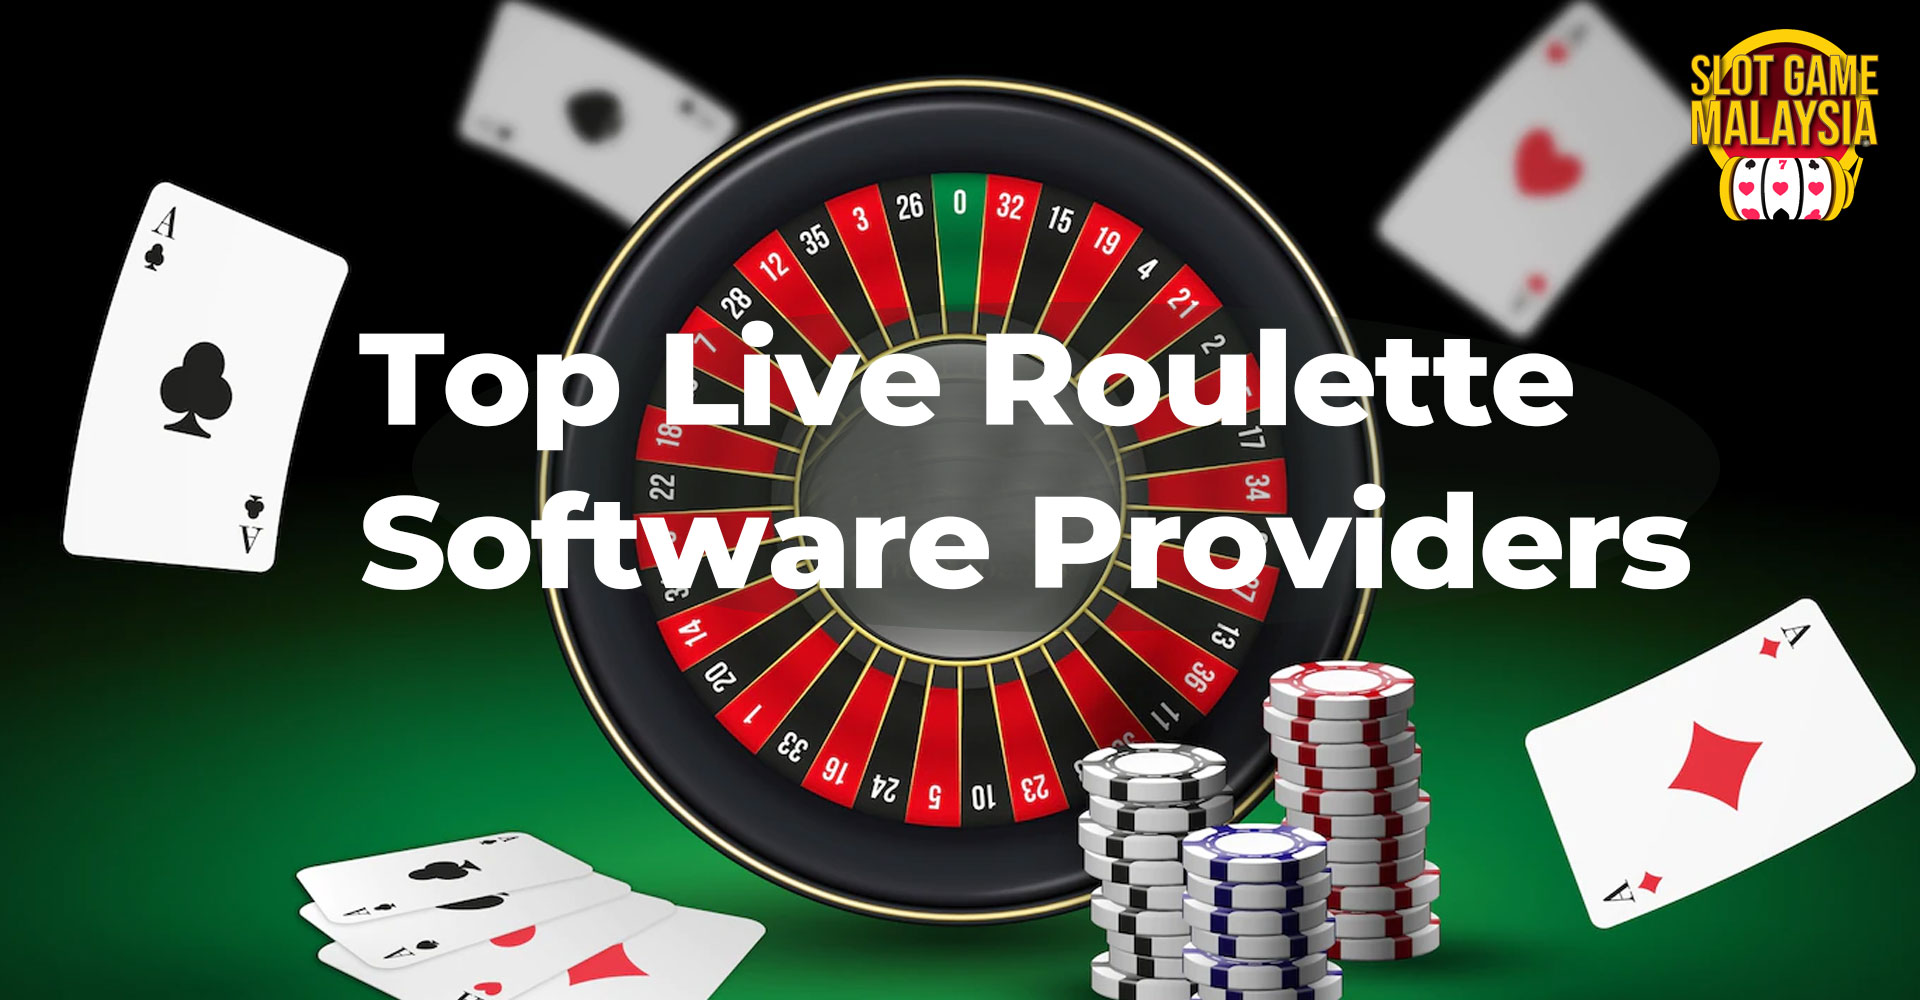 Top Live Roulette Software Providers